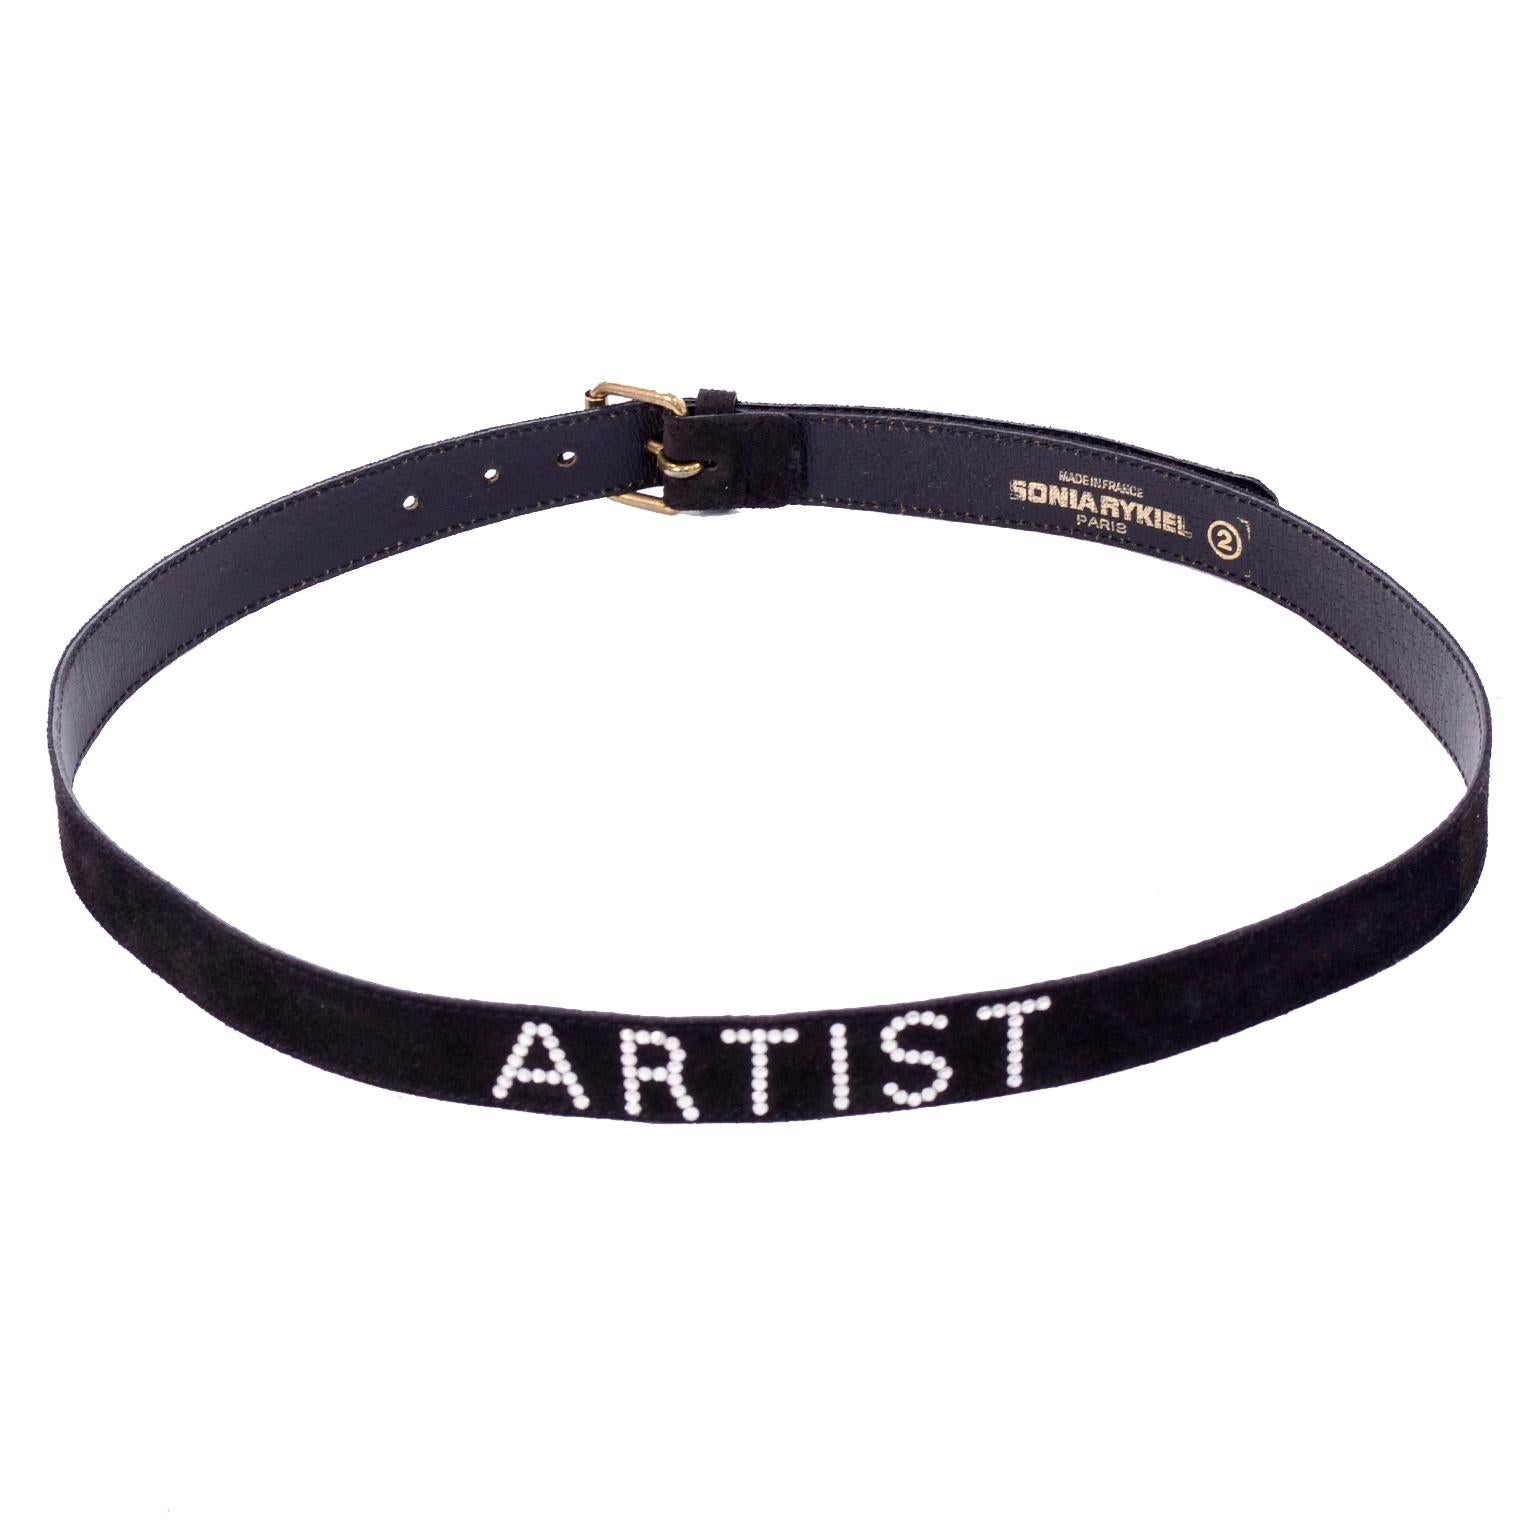 This is a rare embellished black leather vintage belt from Sonia Rykiel with the word 